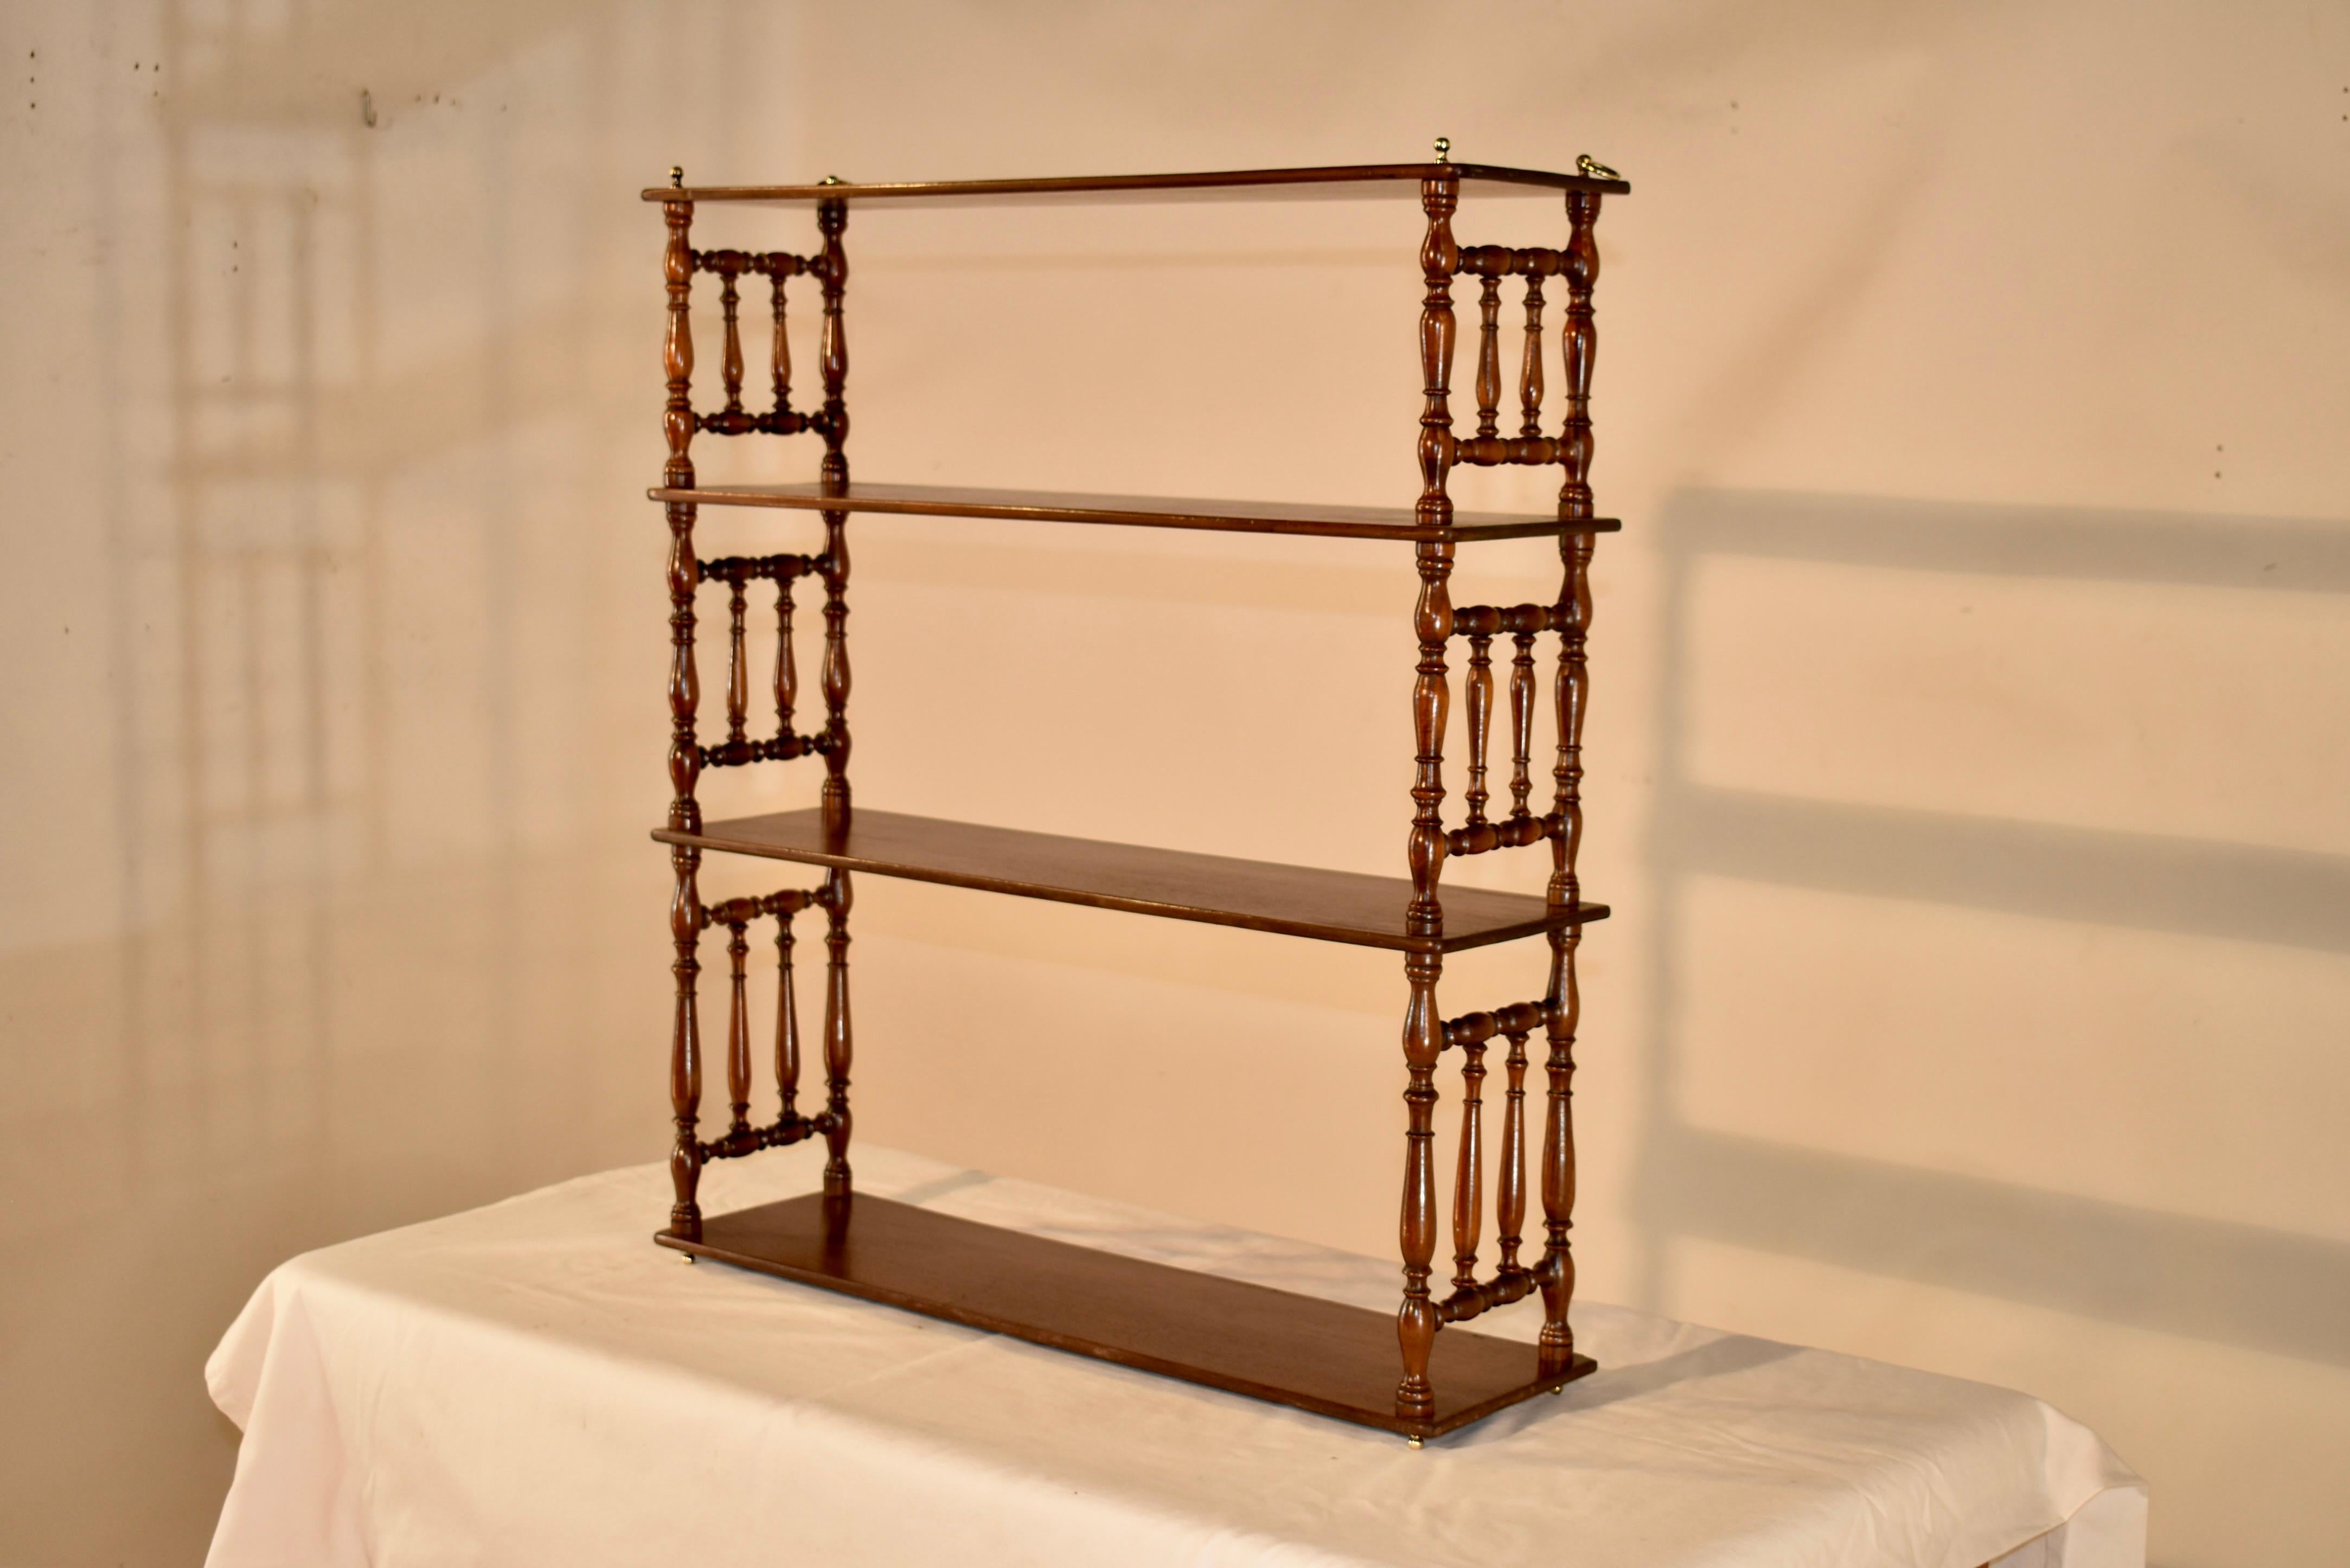 19th century mahogany shelf from England. The top and base have brass finials, following down to three shelves, all made from single boards. The shelves are separated by wonderfully hand turned shelf supports, which give the shelf a lovely profile.